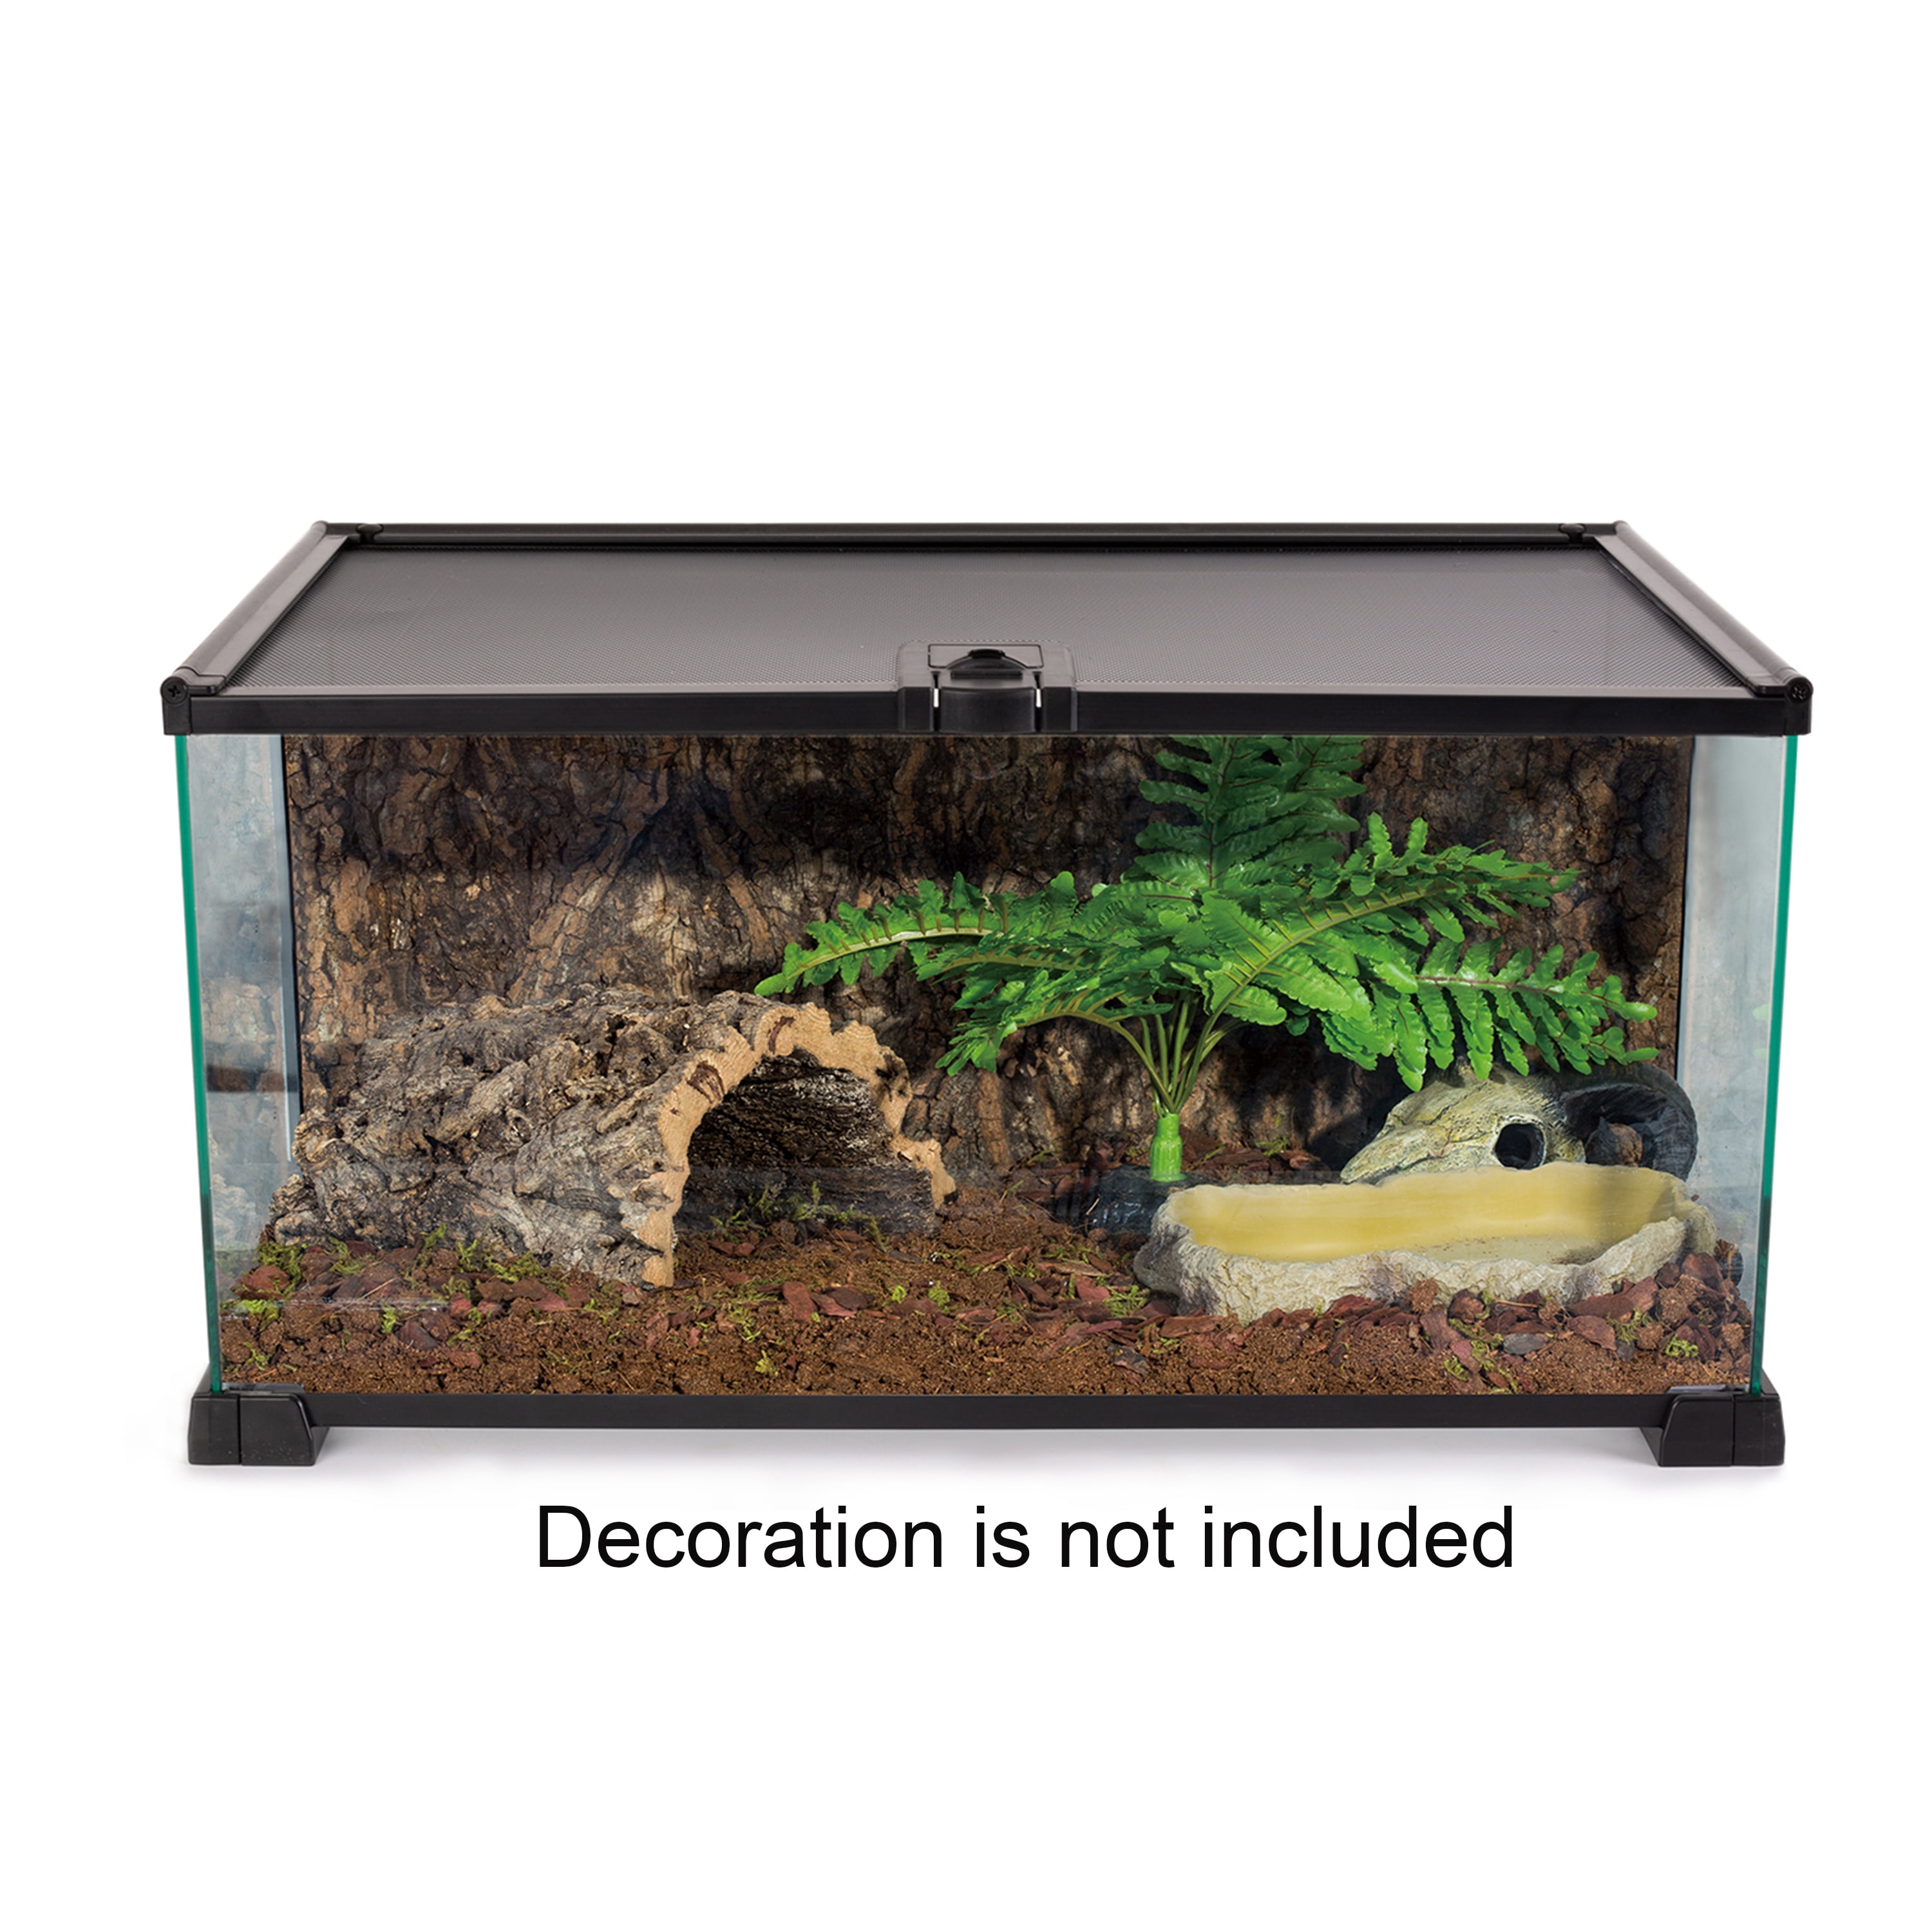 Snakes Turtles Spiders Caige Reptile Tank,Solid Wood Safe Feeding Reptile Terrarium Kit for Lizards Etc Small Animals